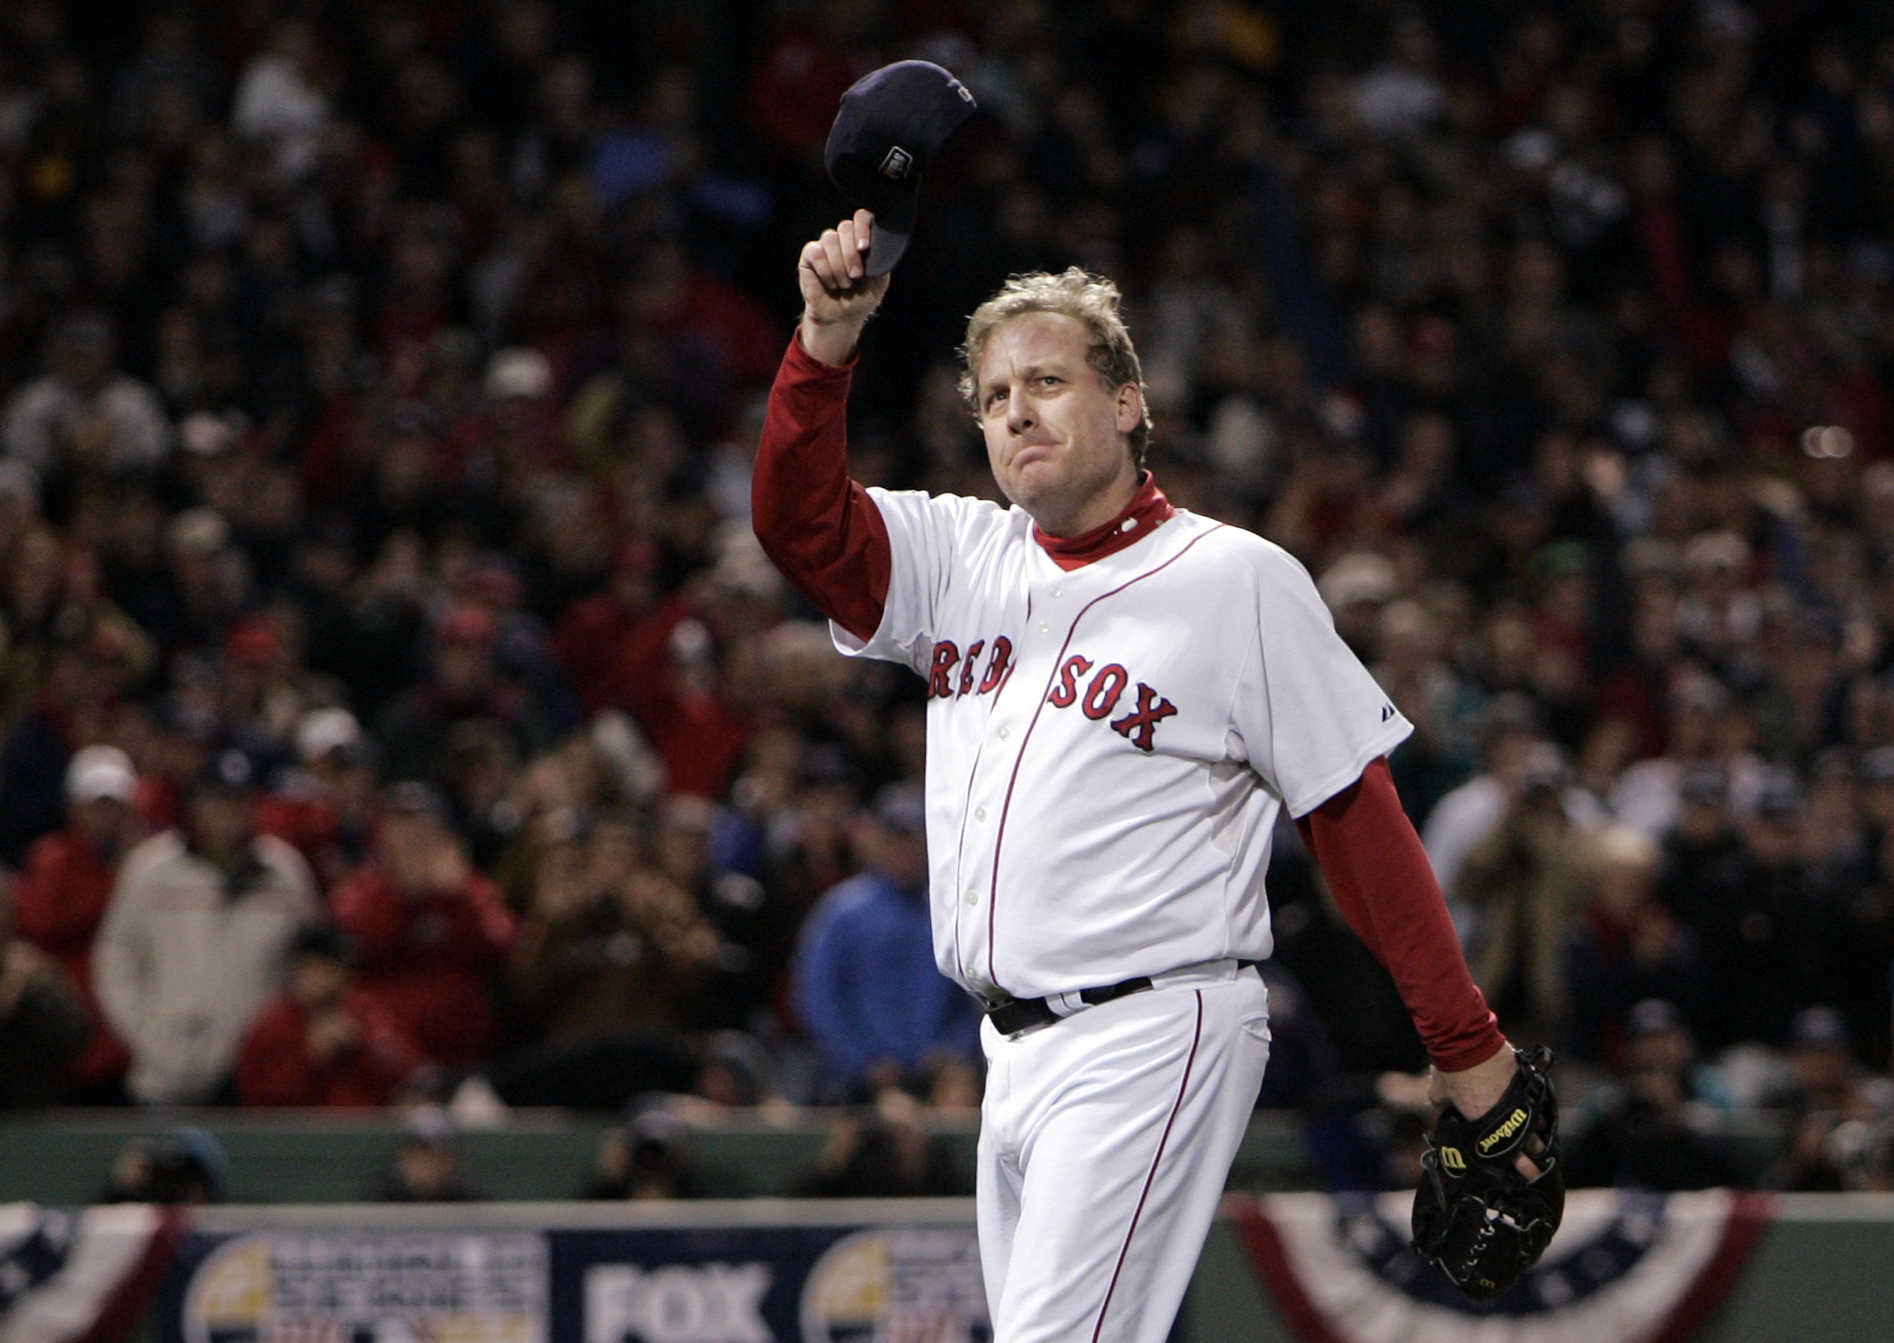 Curt Schilling To Sell 'Bloody Sock' Made Famous During 2004 World Series